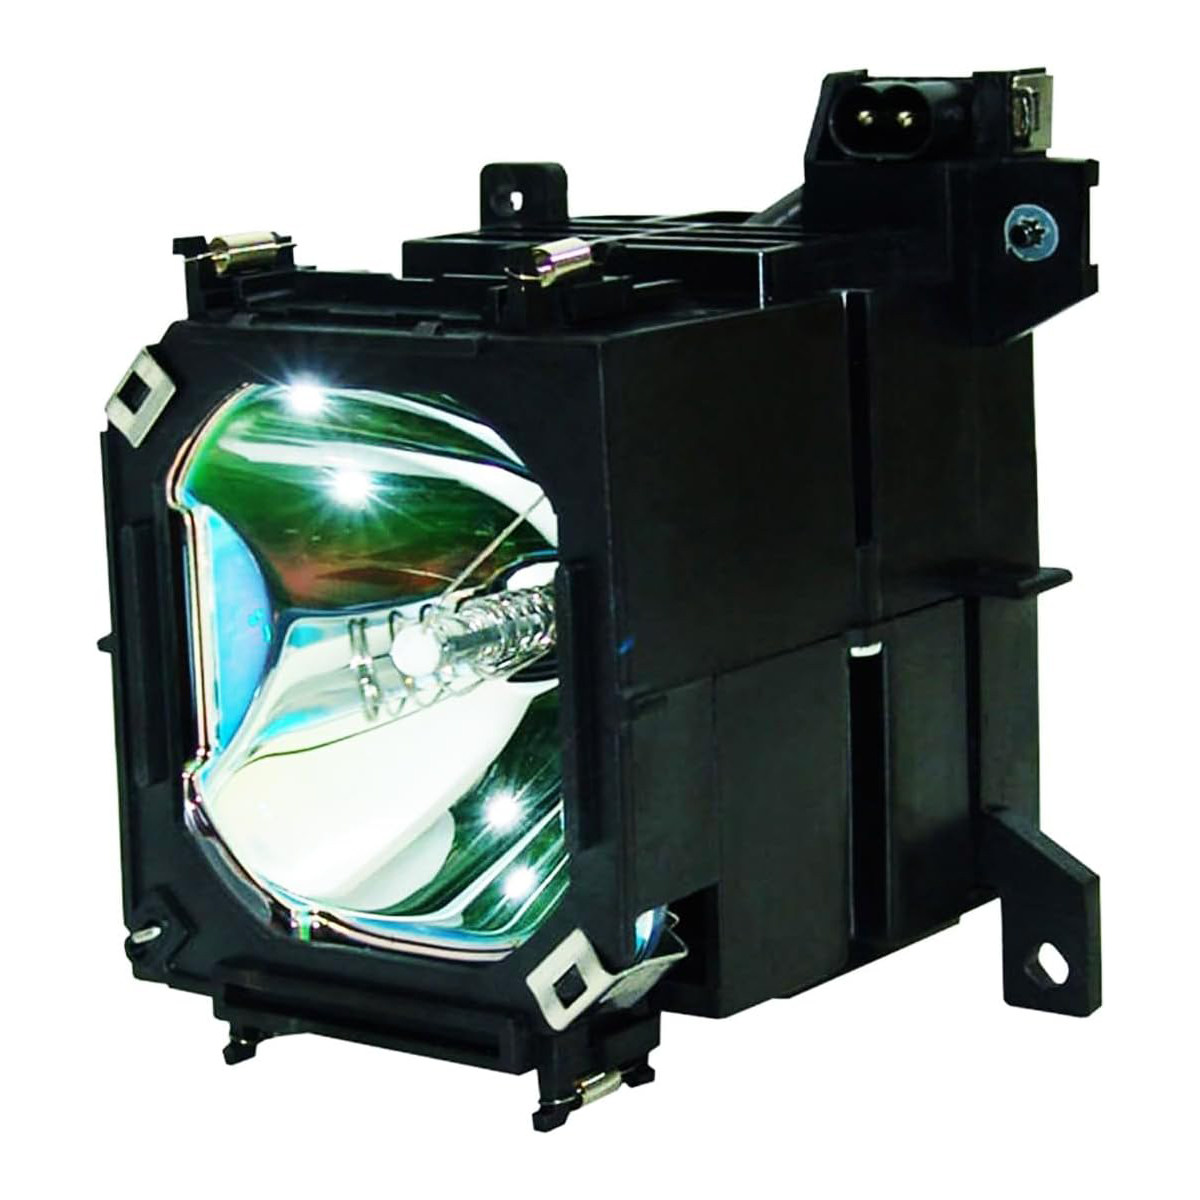 Replacement Projector lamp ELPLP28 For Epson EMP-TW200 EMP-TW200H EMP-TW500